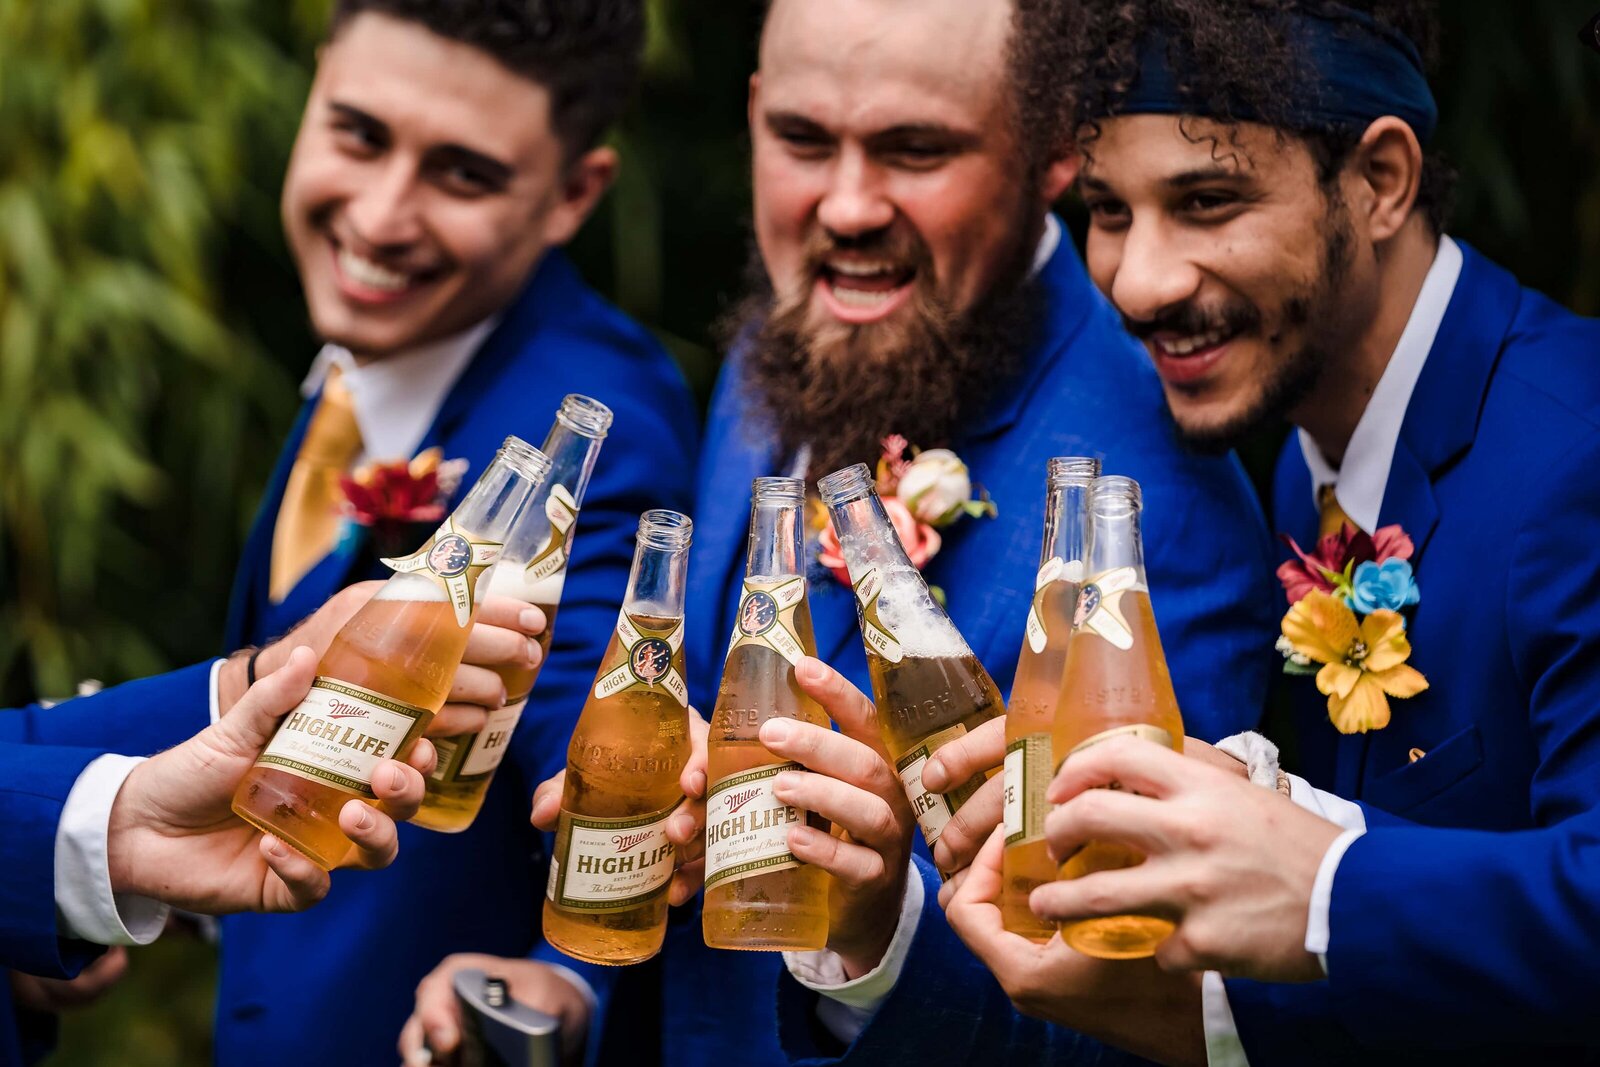 men in blue suits toast with Miller High Life beers on a wedding day